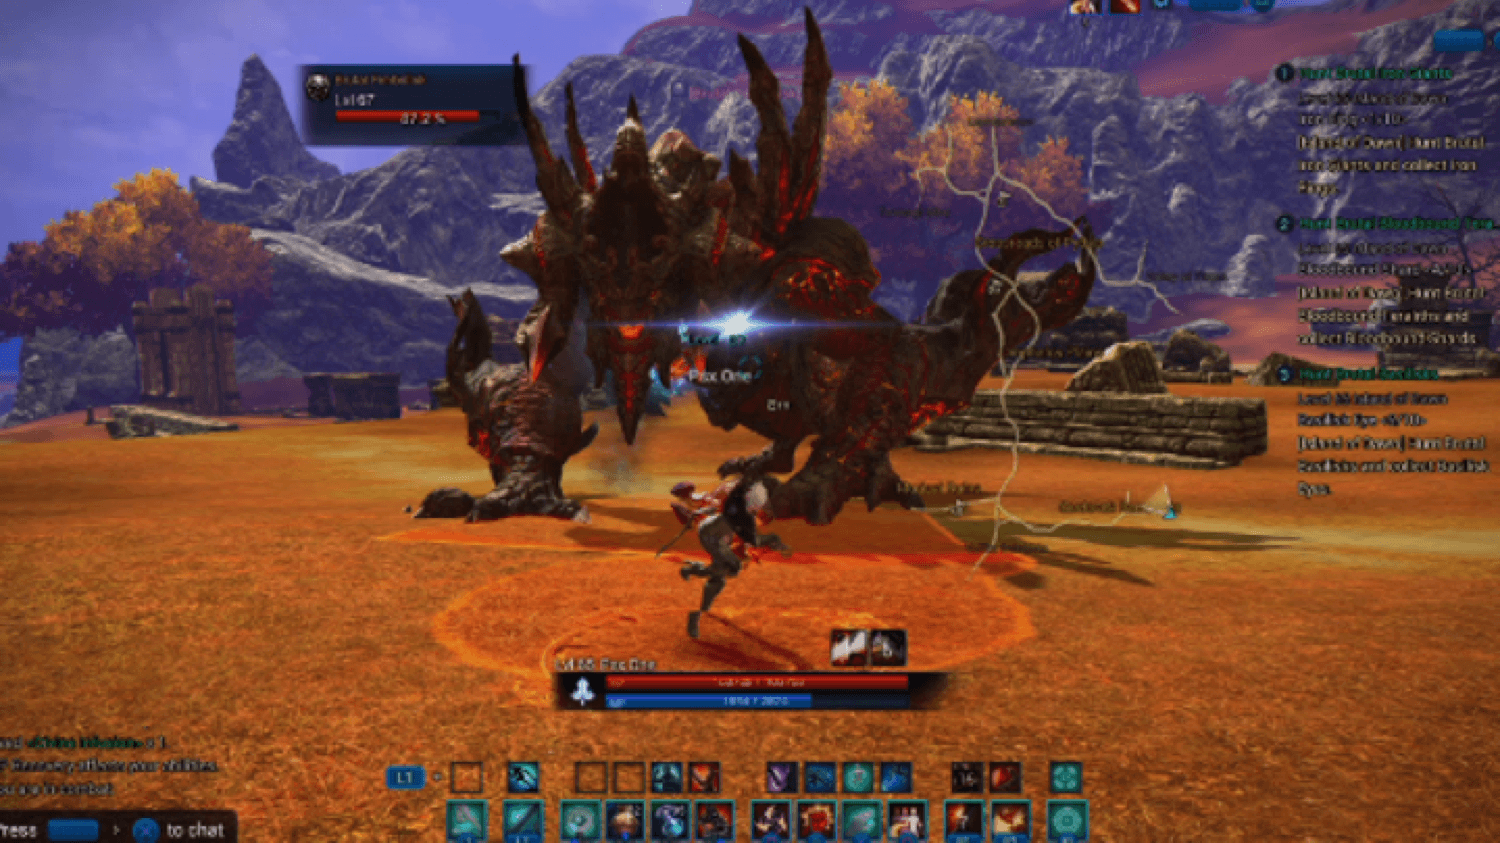 User and expert opinions for Tera Online